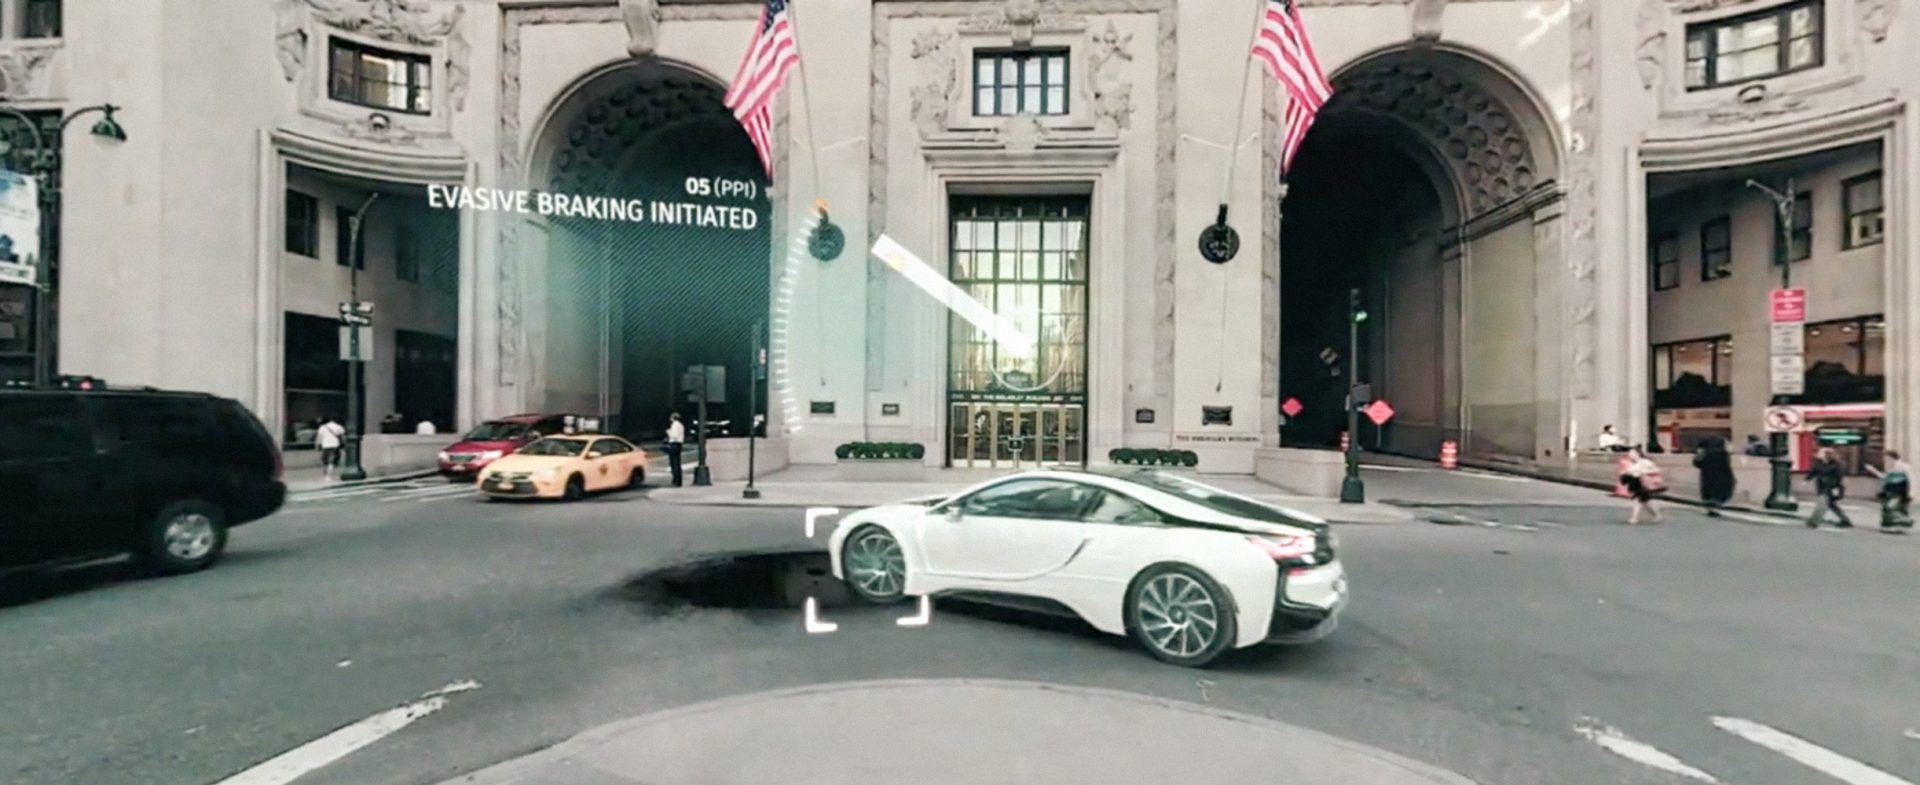 The image shows a BMW car in the city.